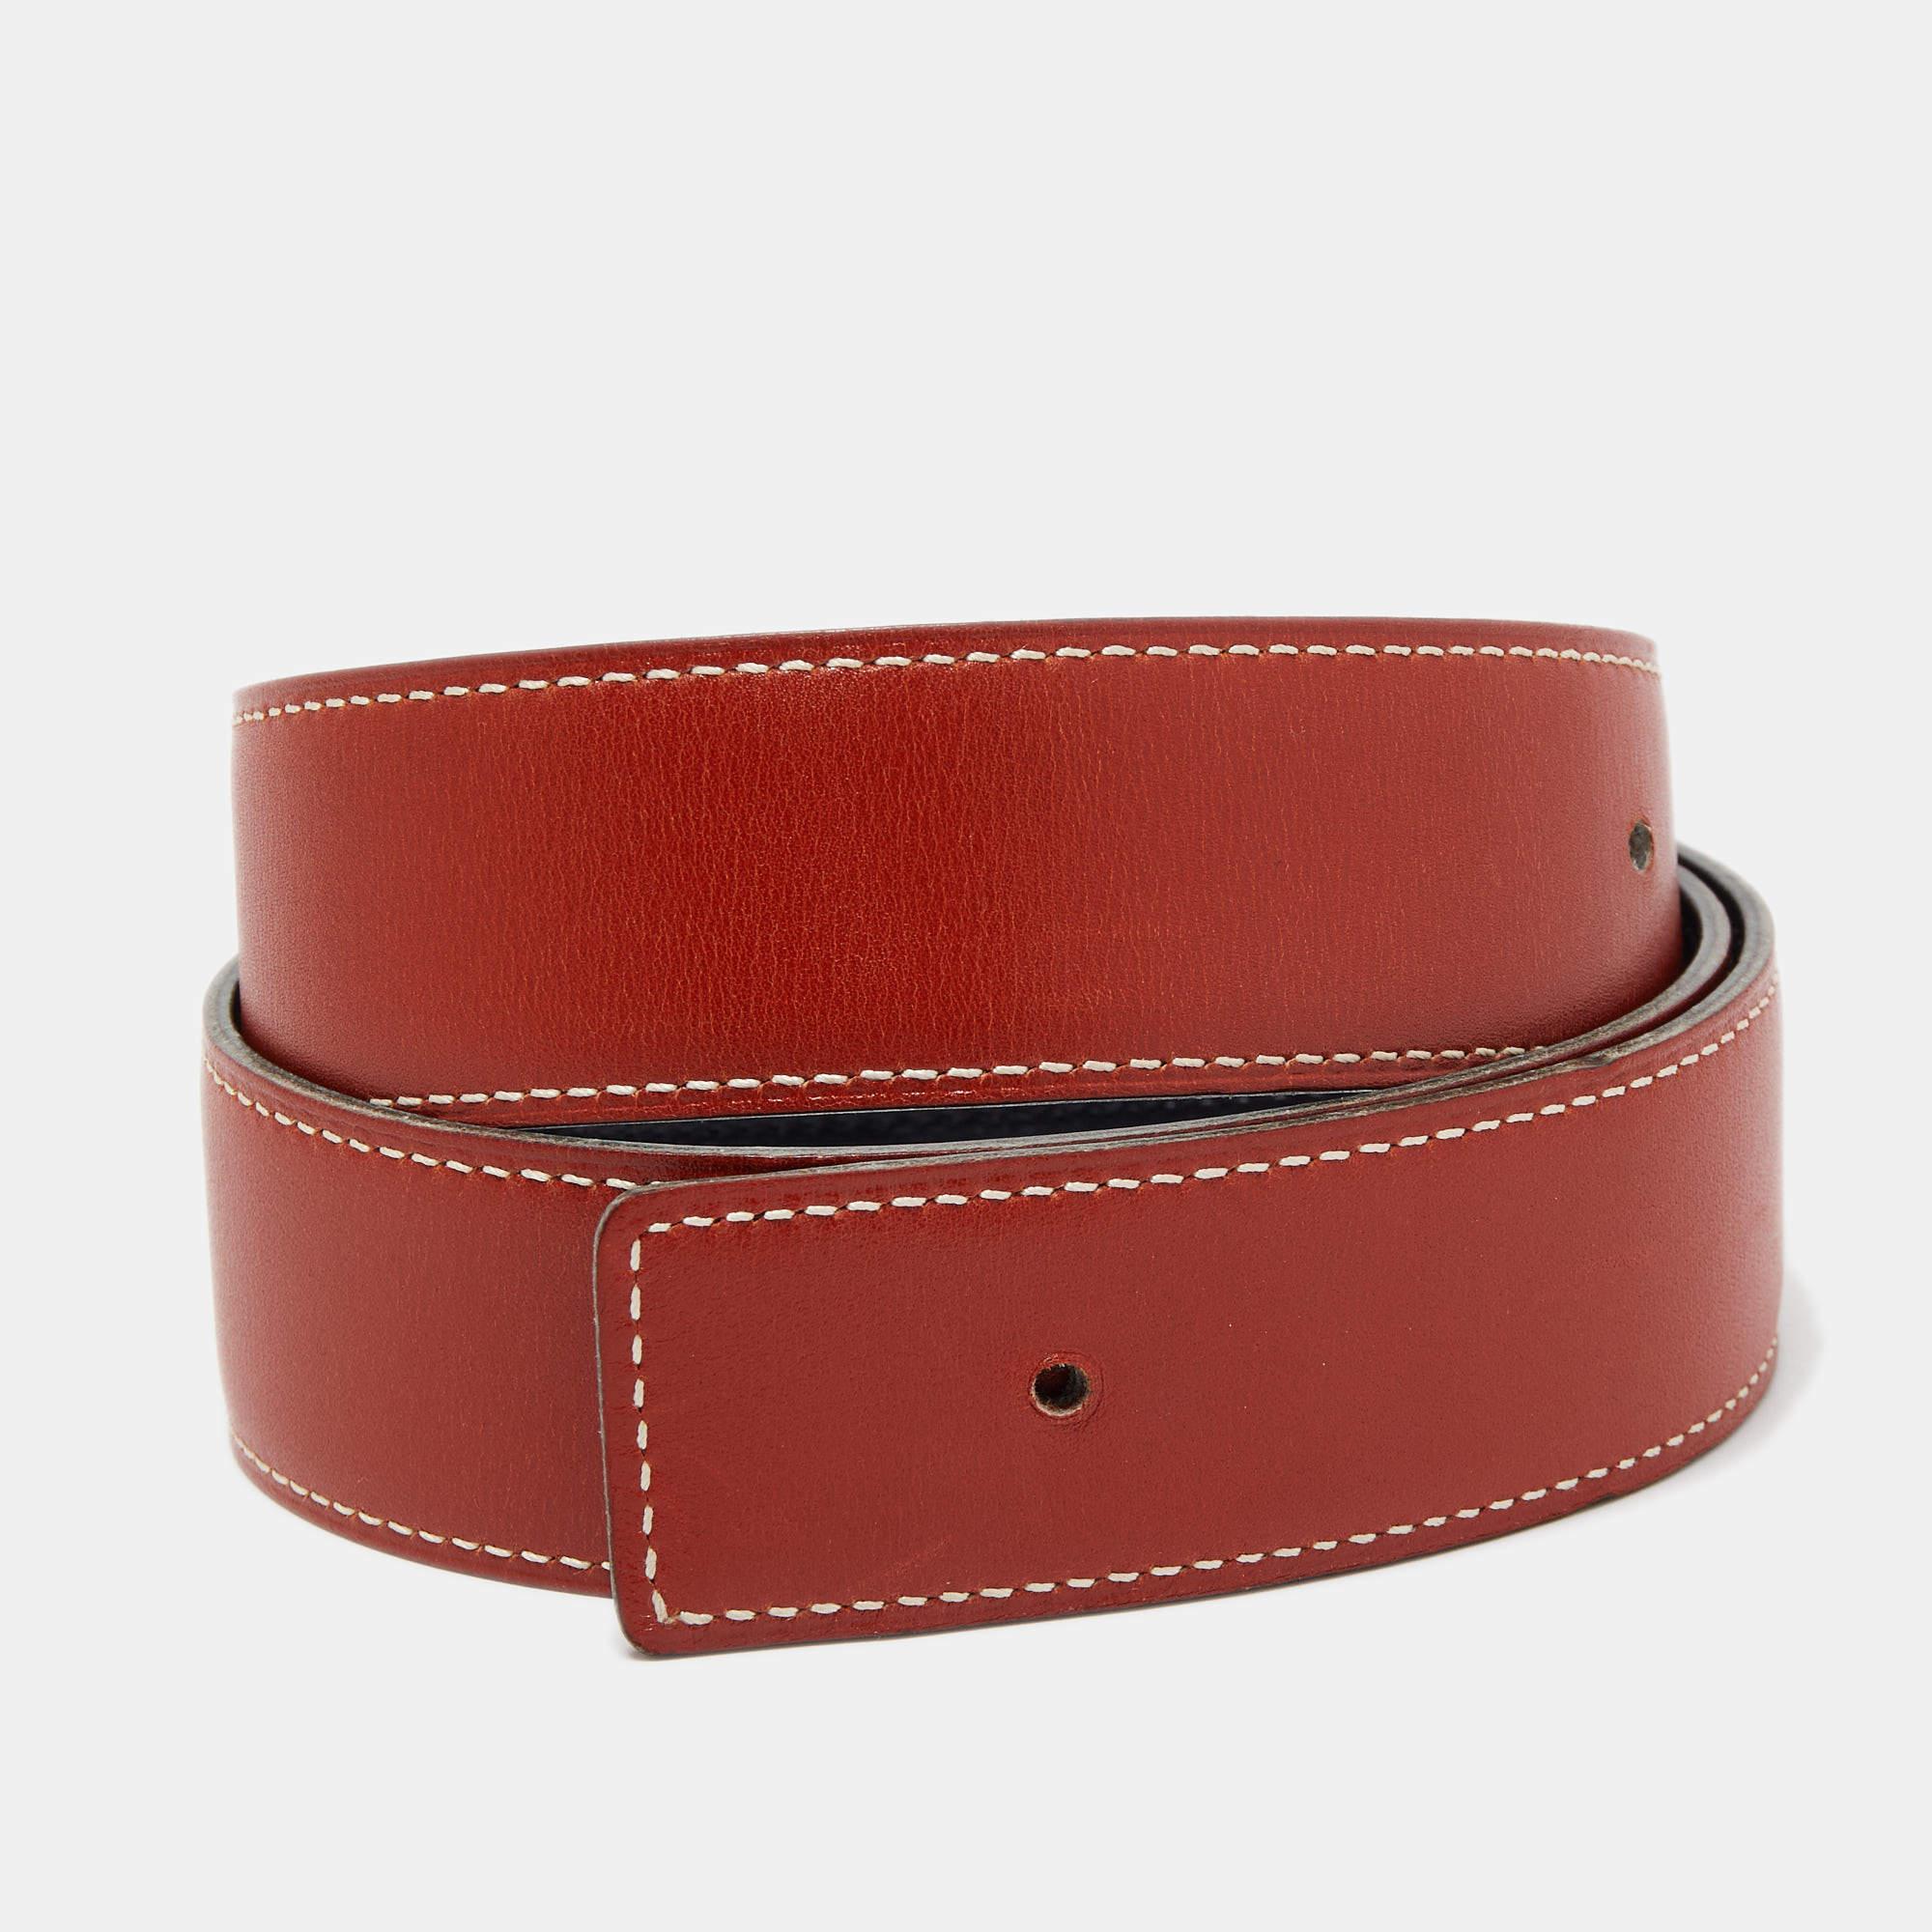 The Hermès strap is a luxurious accessory, crafted from high-quality navy blue box leather. It features impeccable craftsmanship, a smooth and glossy finish, and is designed to be interchangeable with Hermès belt buckles, offering a timeless and